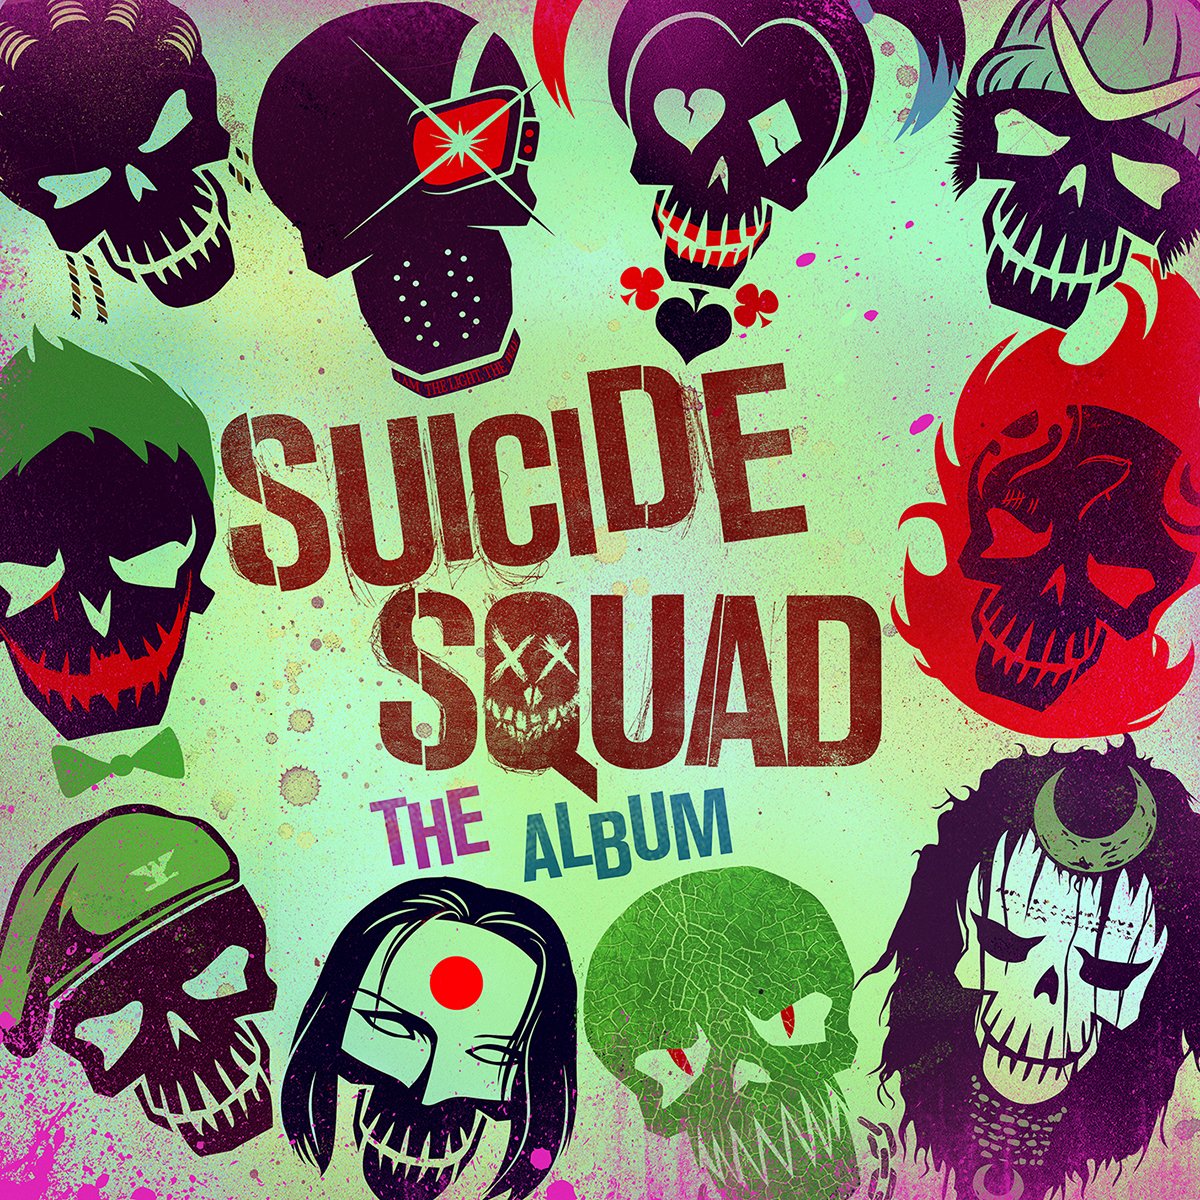 RT @MarkRonson: Me @ActionBronson & Dan Auerbach made a banger Standing In The Rain 4 #SuicideSquad OUT 8/5! https://t.co/fyTxyvWgpa https:…